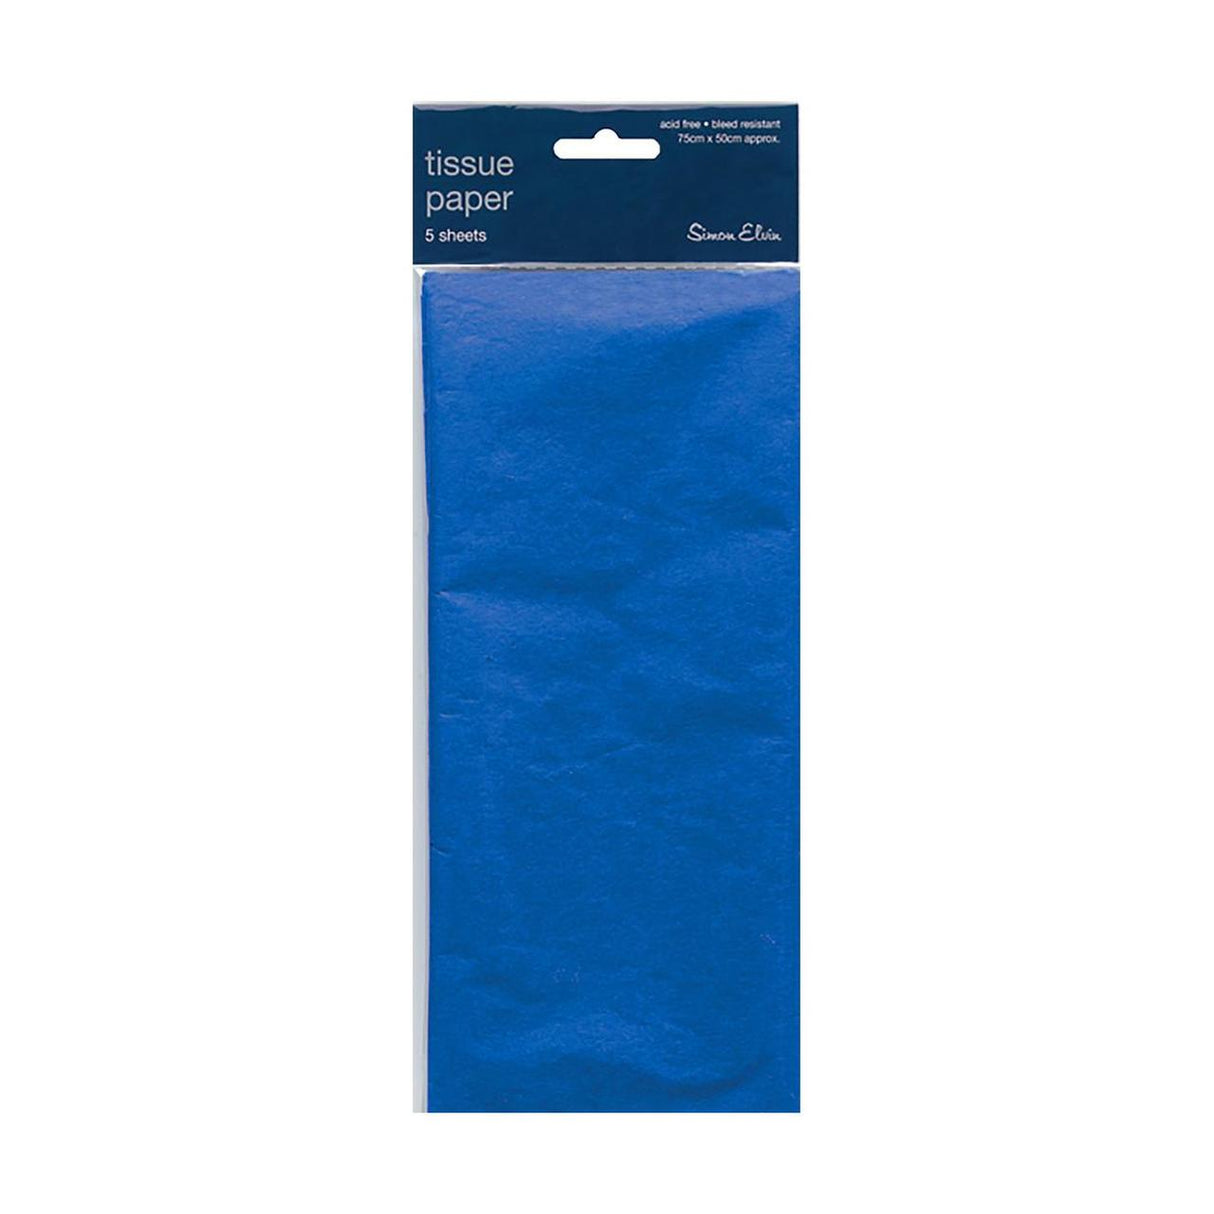 5 Sheets of Blue Tissue Paper